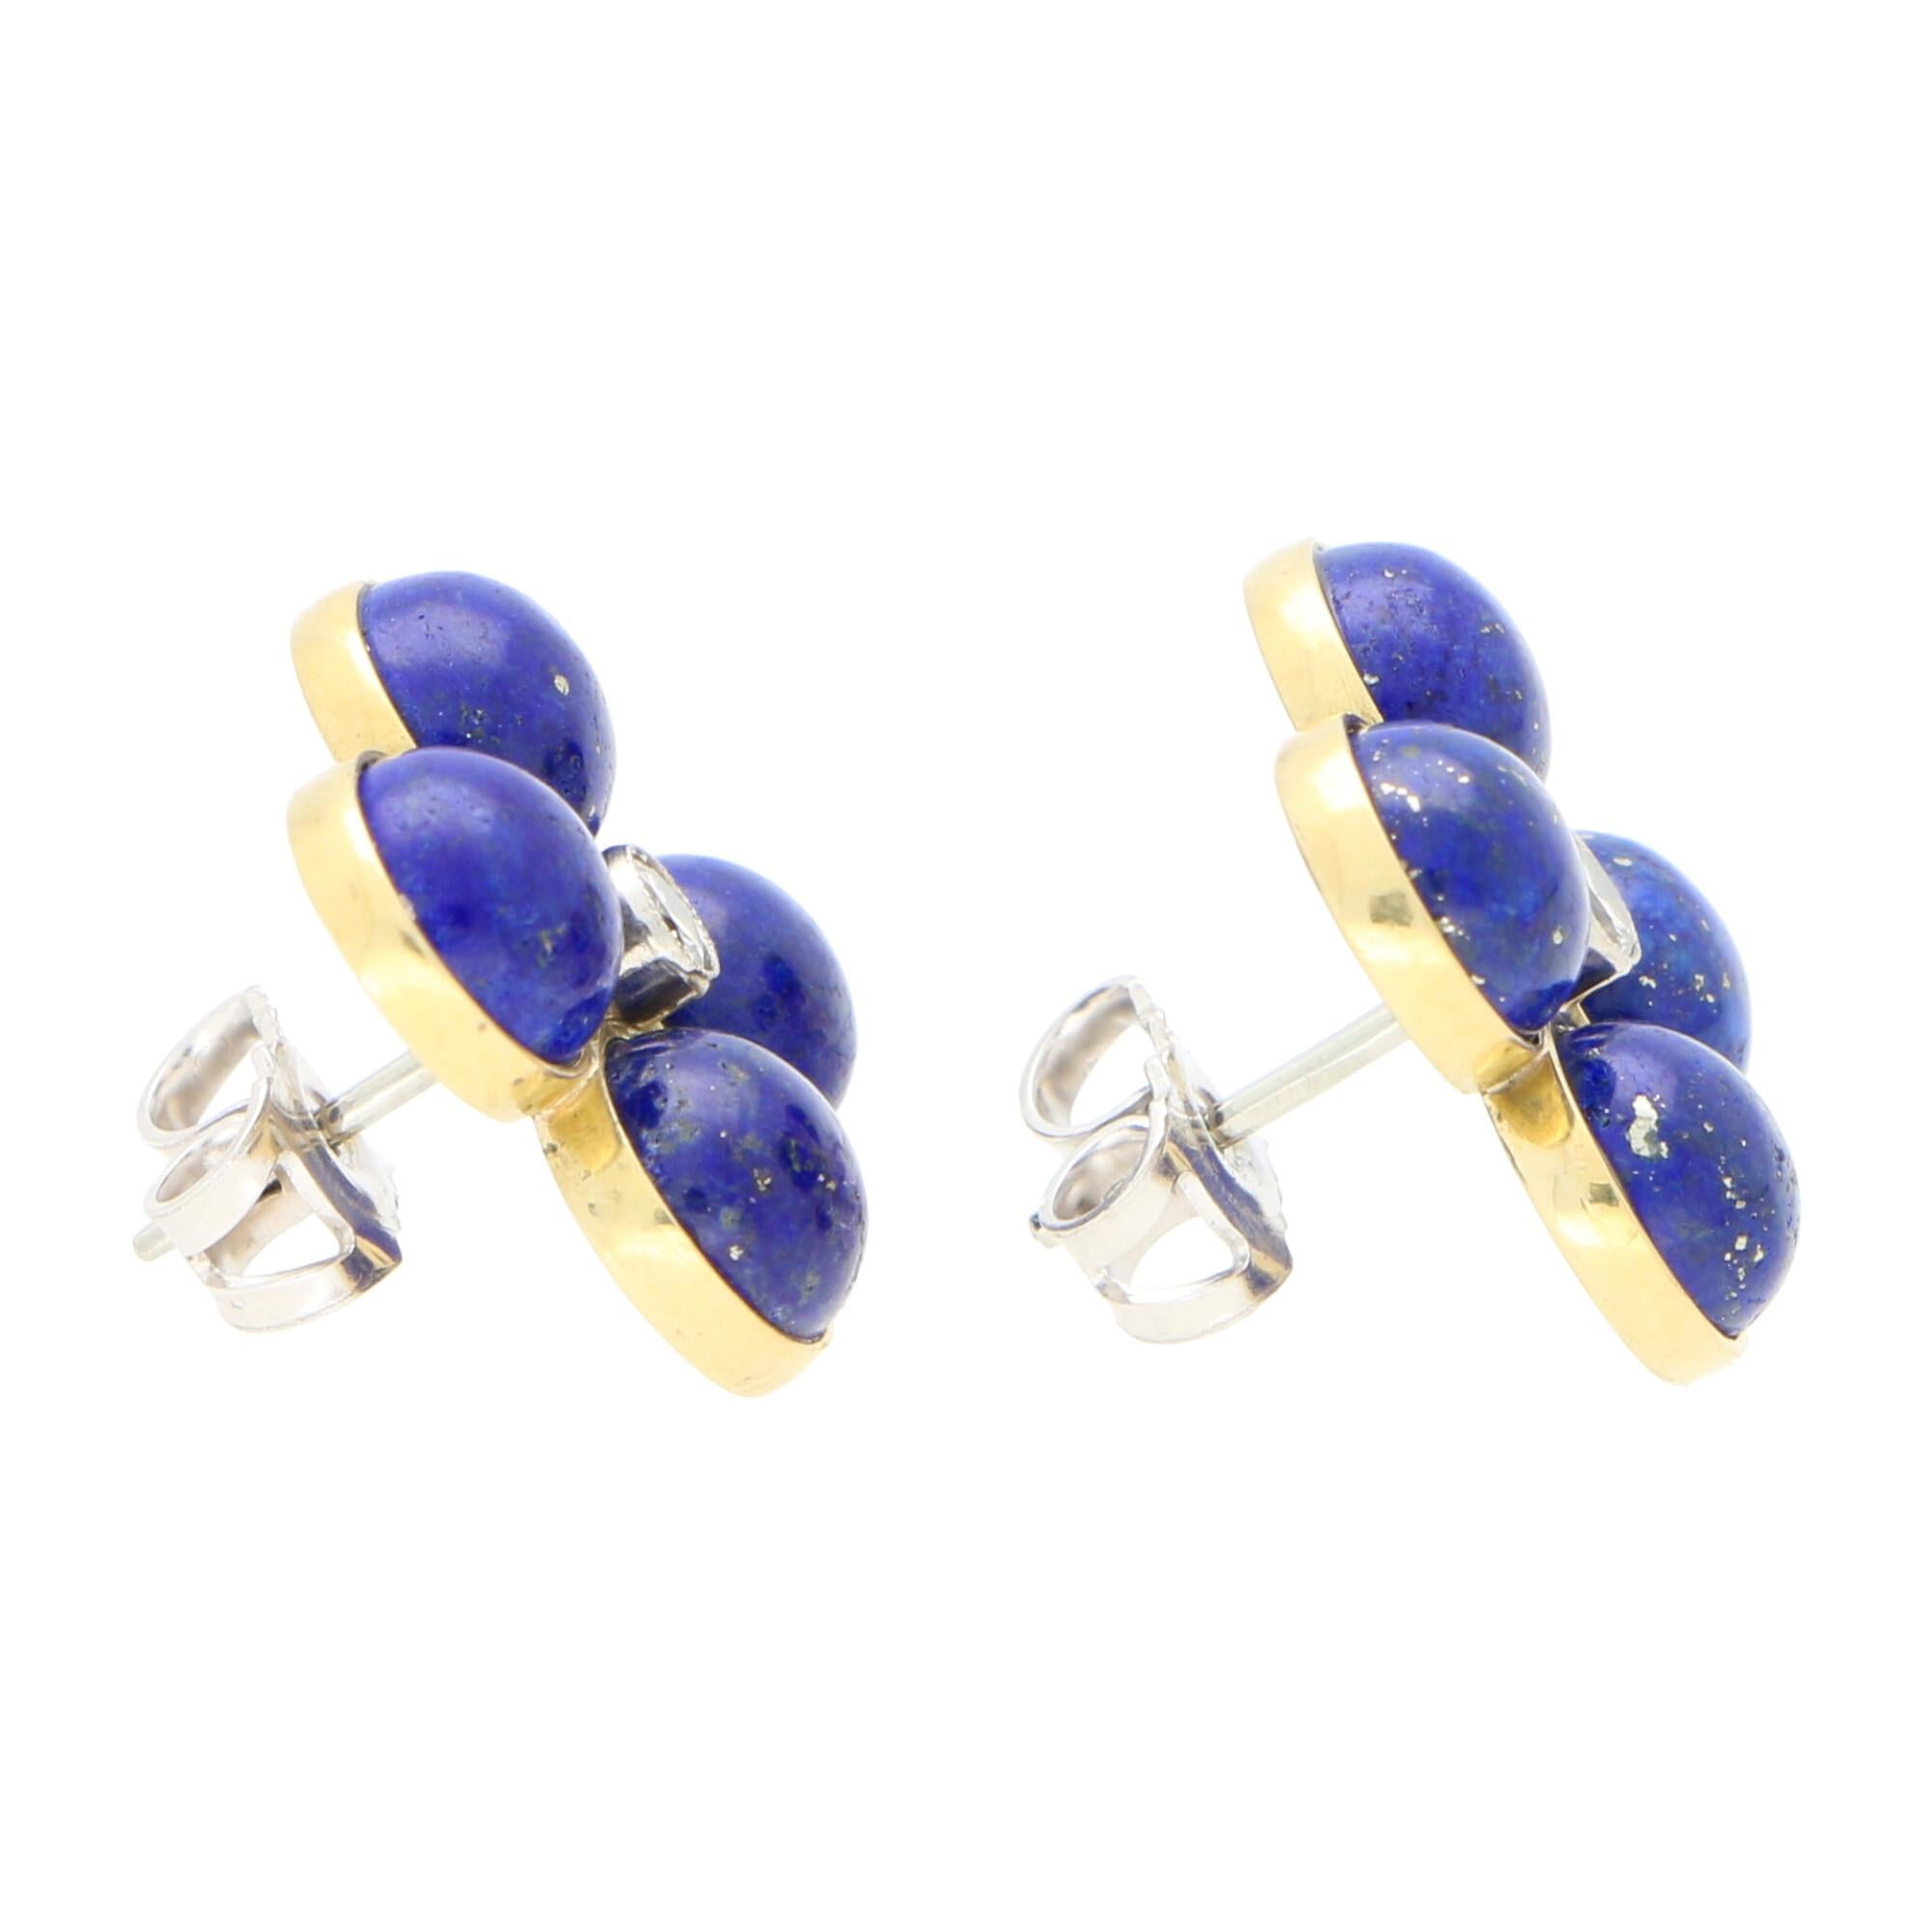 Cabochon Blue Lapis Lazuli and Diamond Clover Stud Earrings Set in 18k Yellow Gold